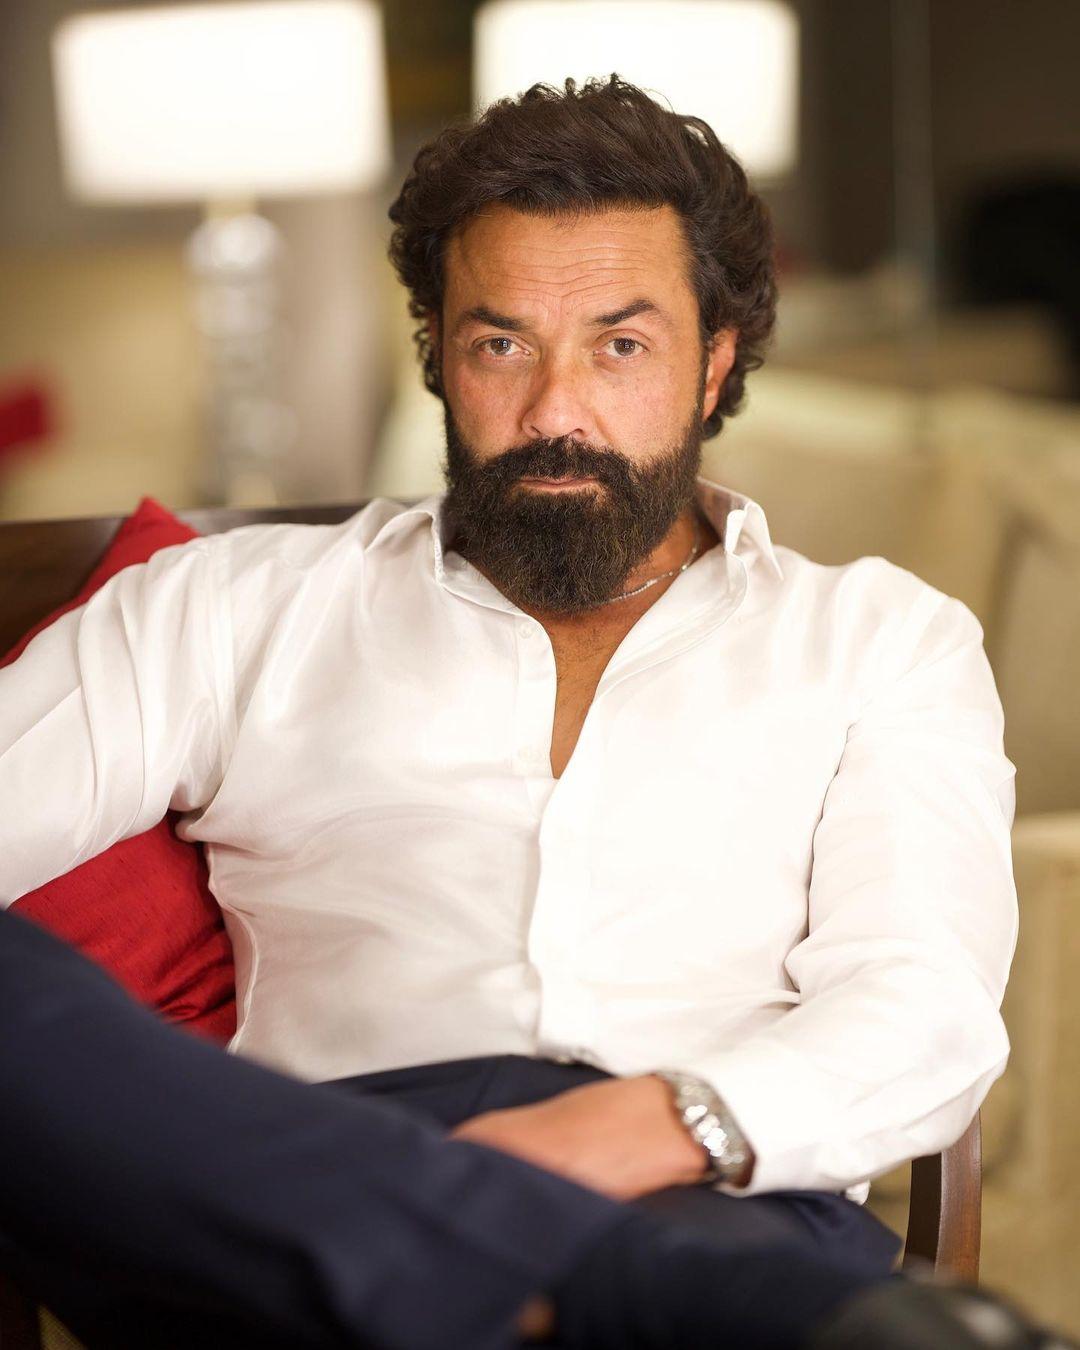 Bobby Deol: Known for his charming looks and catchy tunes from his films, Bobby Deol gained fame with movies like 